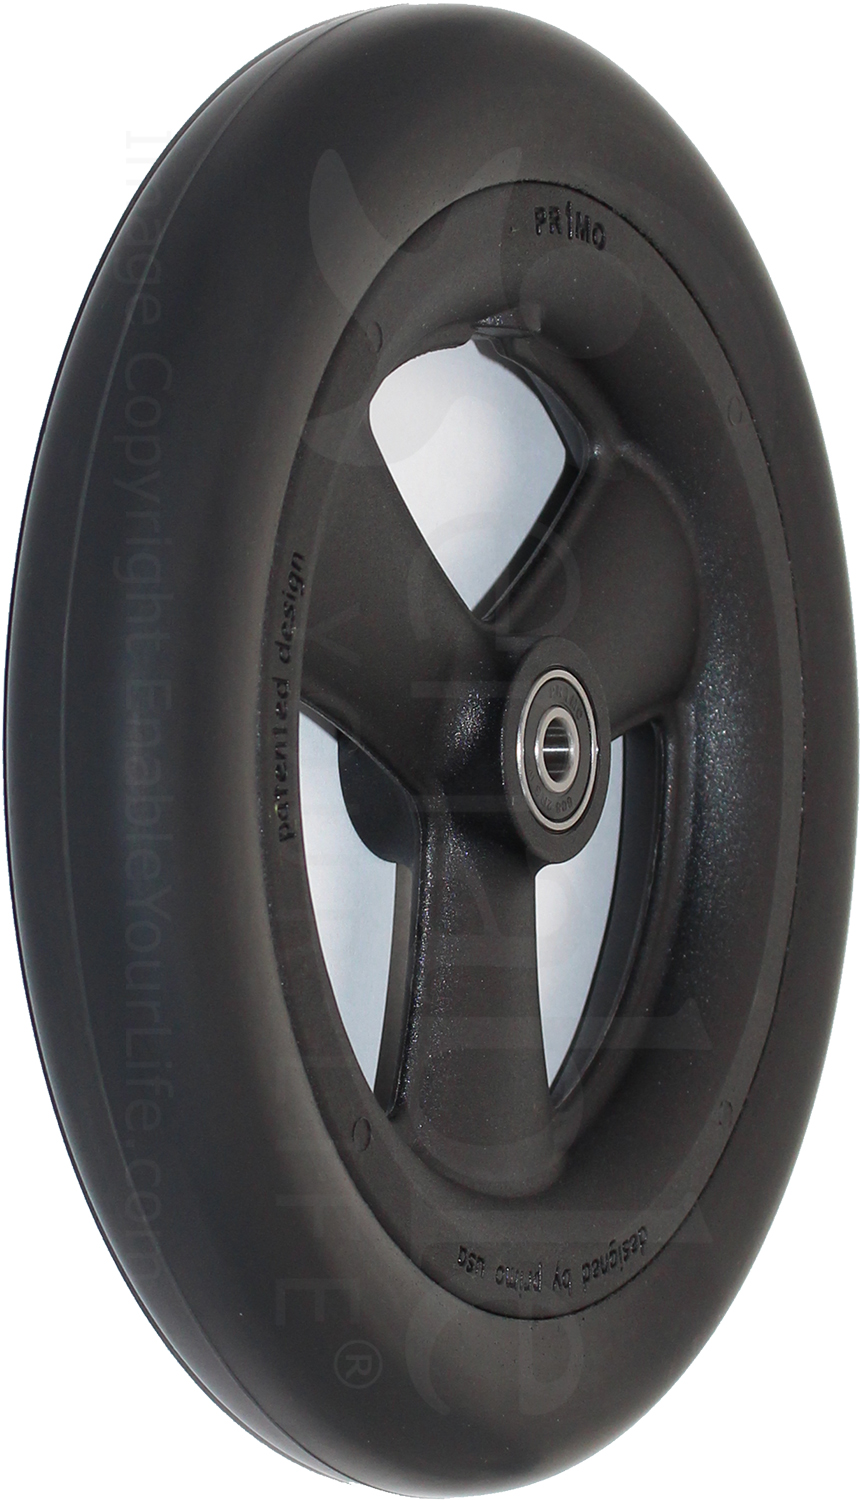 8 x 1 1/4 in. Primo Hollow Spoke Wheelchair Caster with Urethane Tire - Angled view shown